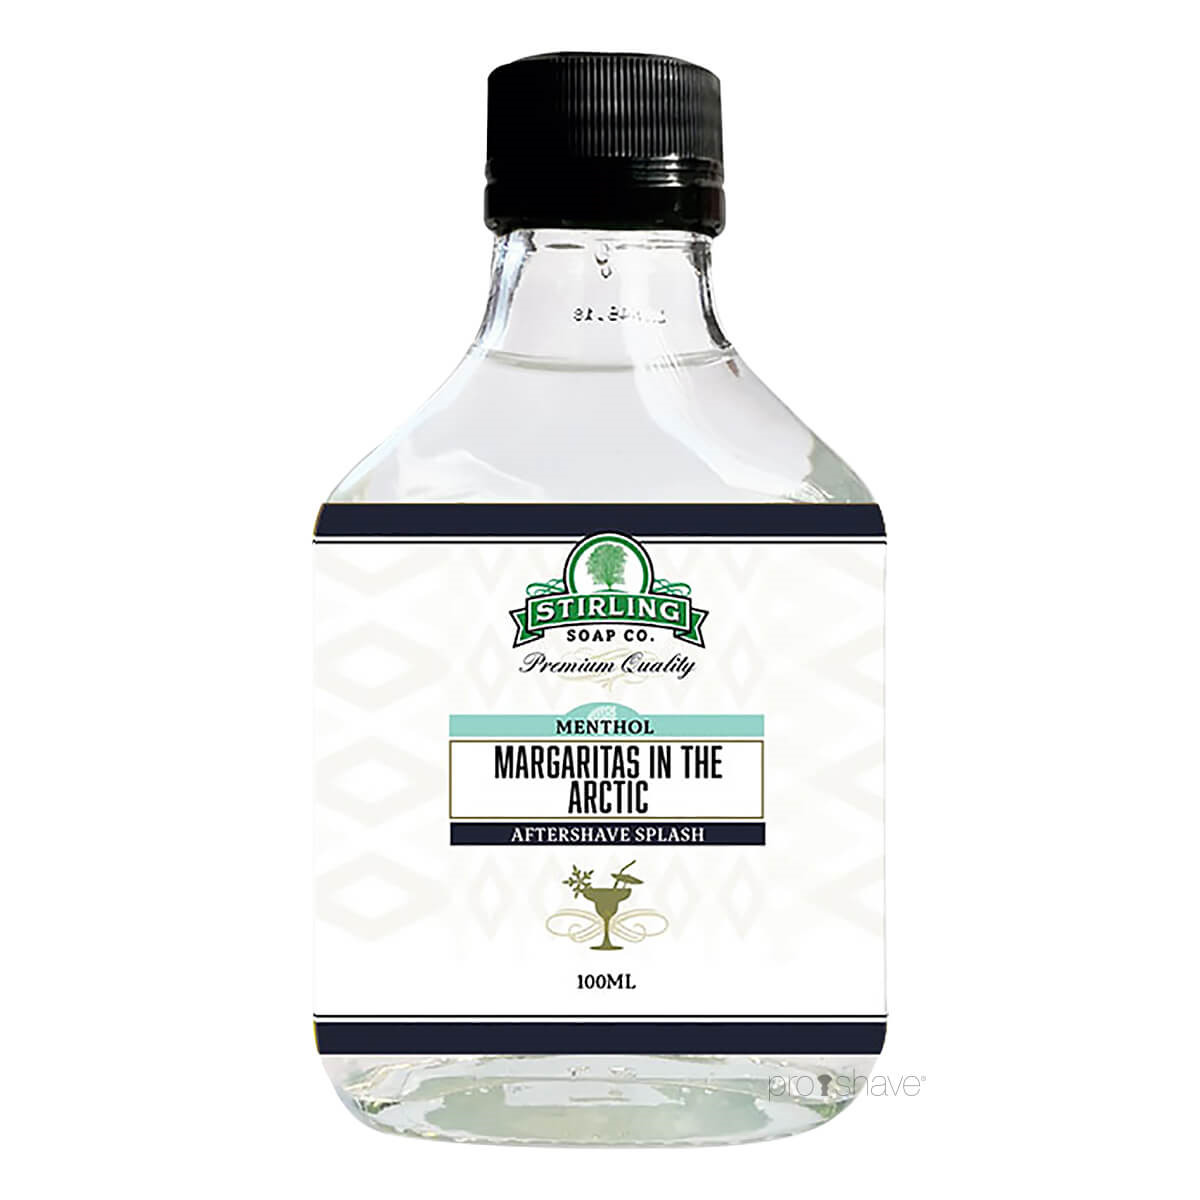 Stirling Soap Co. Aftershave Splash, Margaritas in the Arctic, 100 ml.